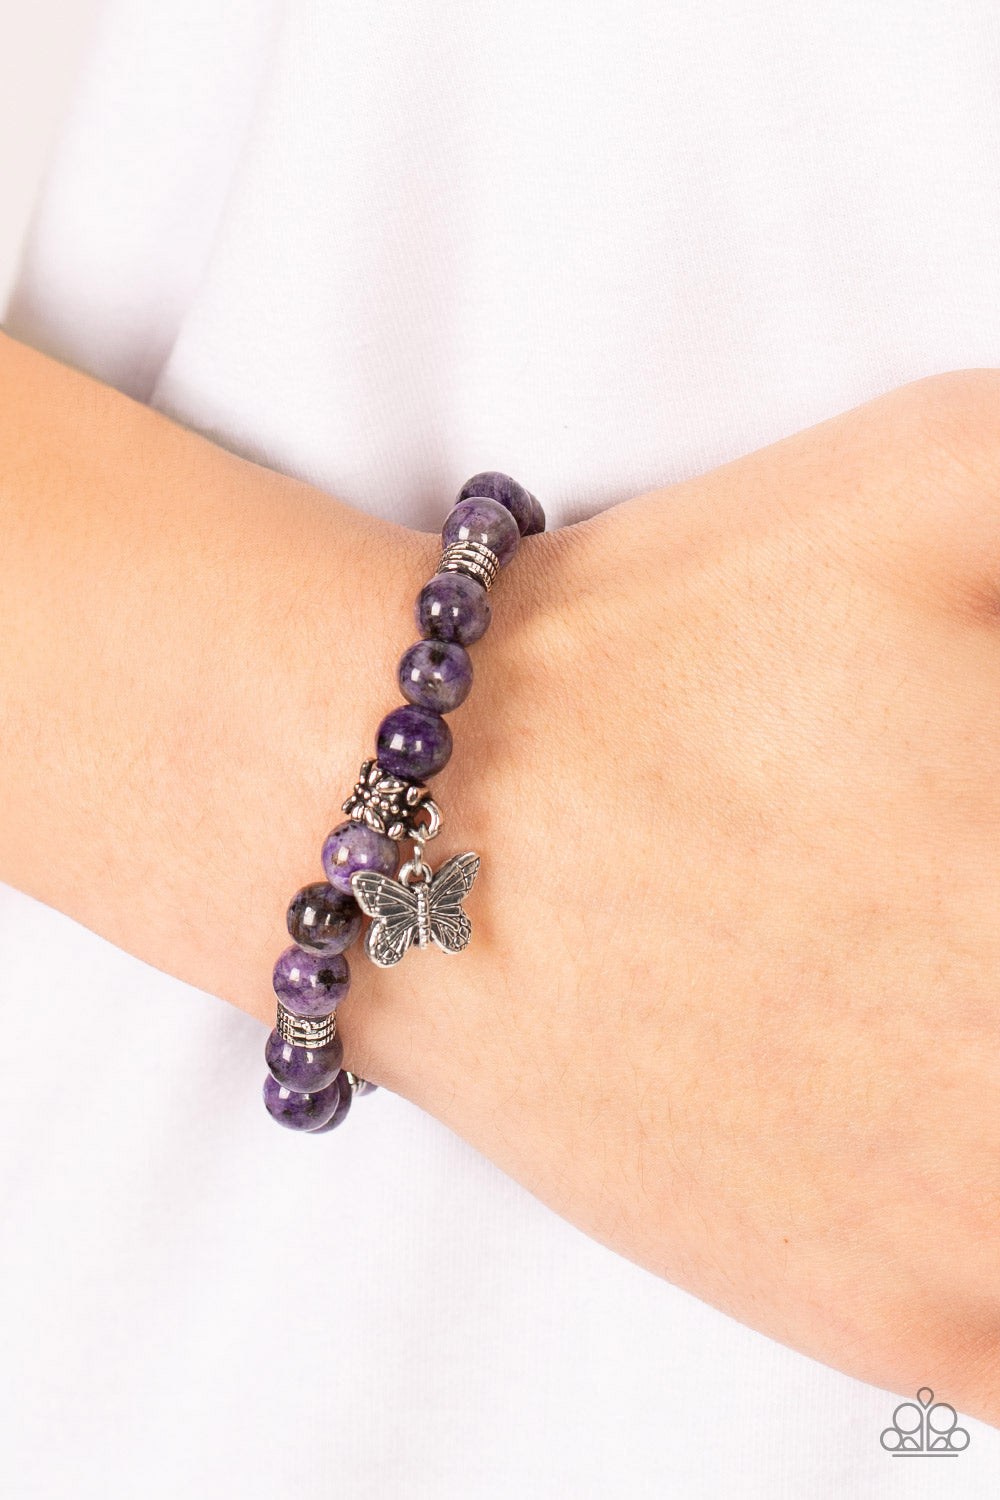 Butterfly Nirvana - Purple Amethyst - Silver Charm - Stretchy Bracelet Paparazzi Accessories - Silver butterfly charm, textured silver accents and amethyst stone beads are threaded along stretchy bands around the wrist for a whimsical style bracelet. Bejeweled Accessories By Kristie - Trendy fashion jewelry for everyone -